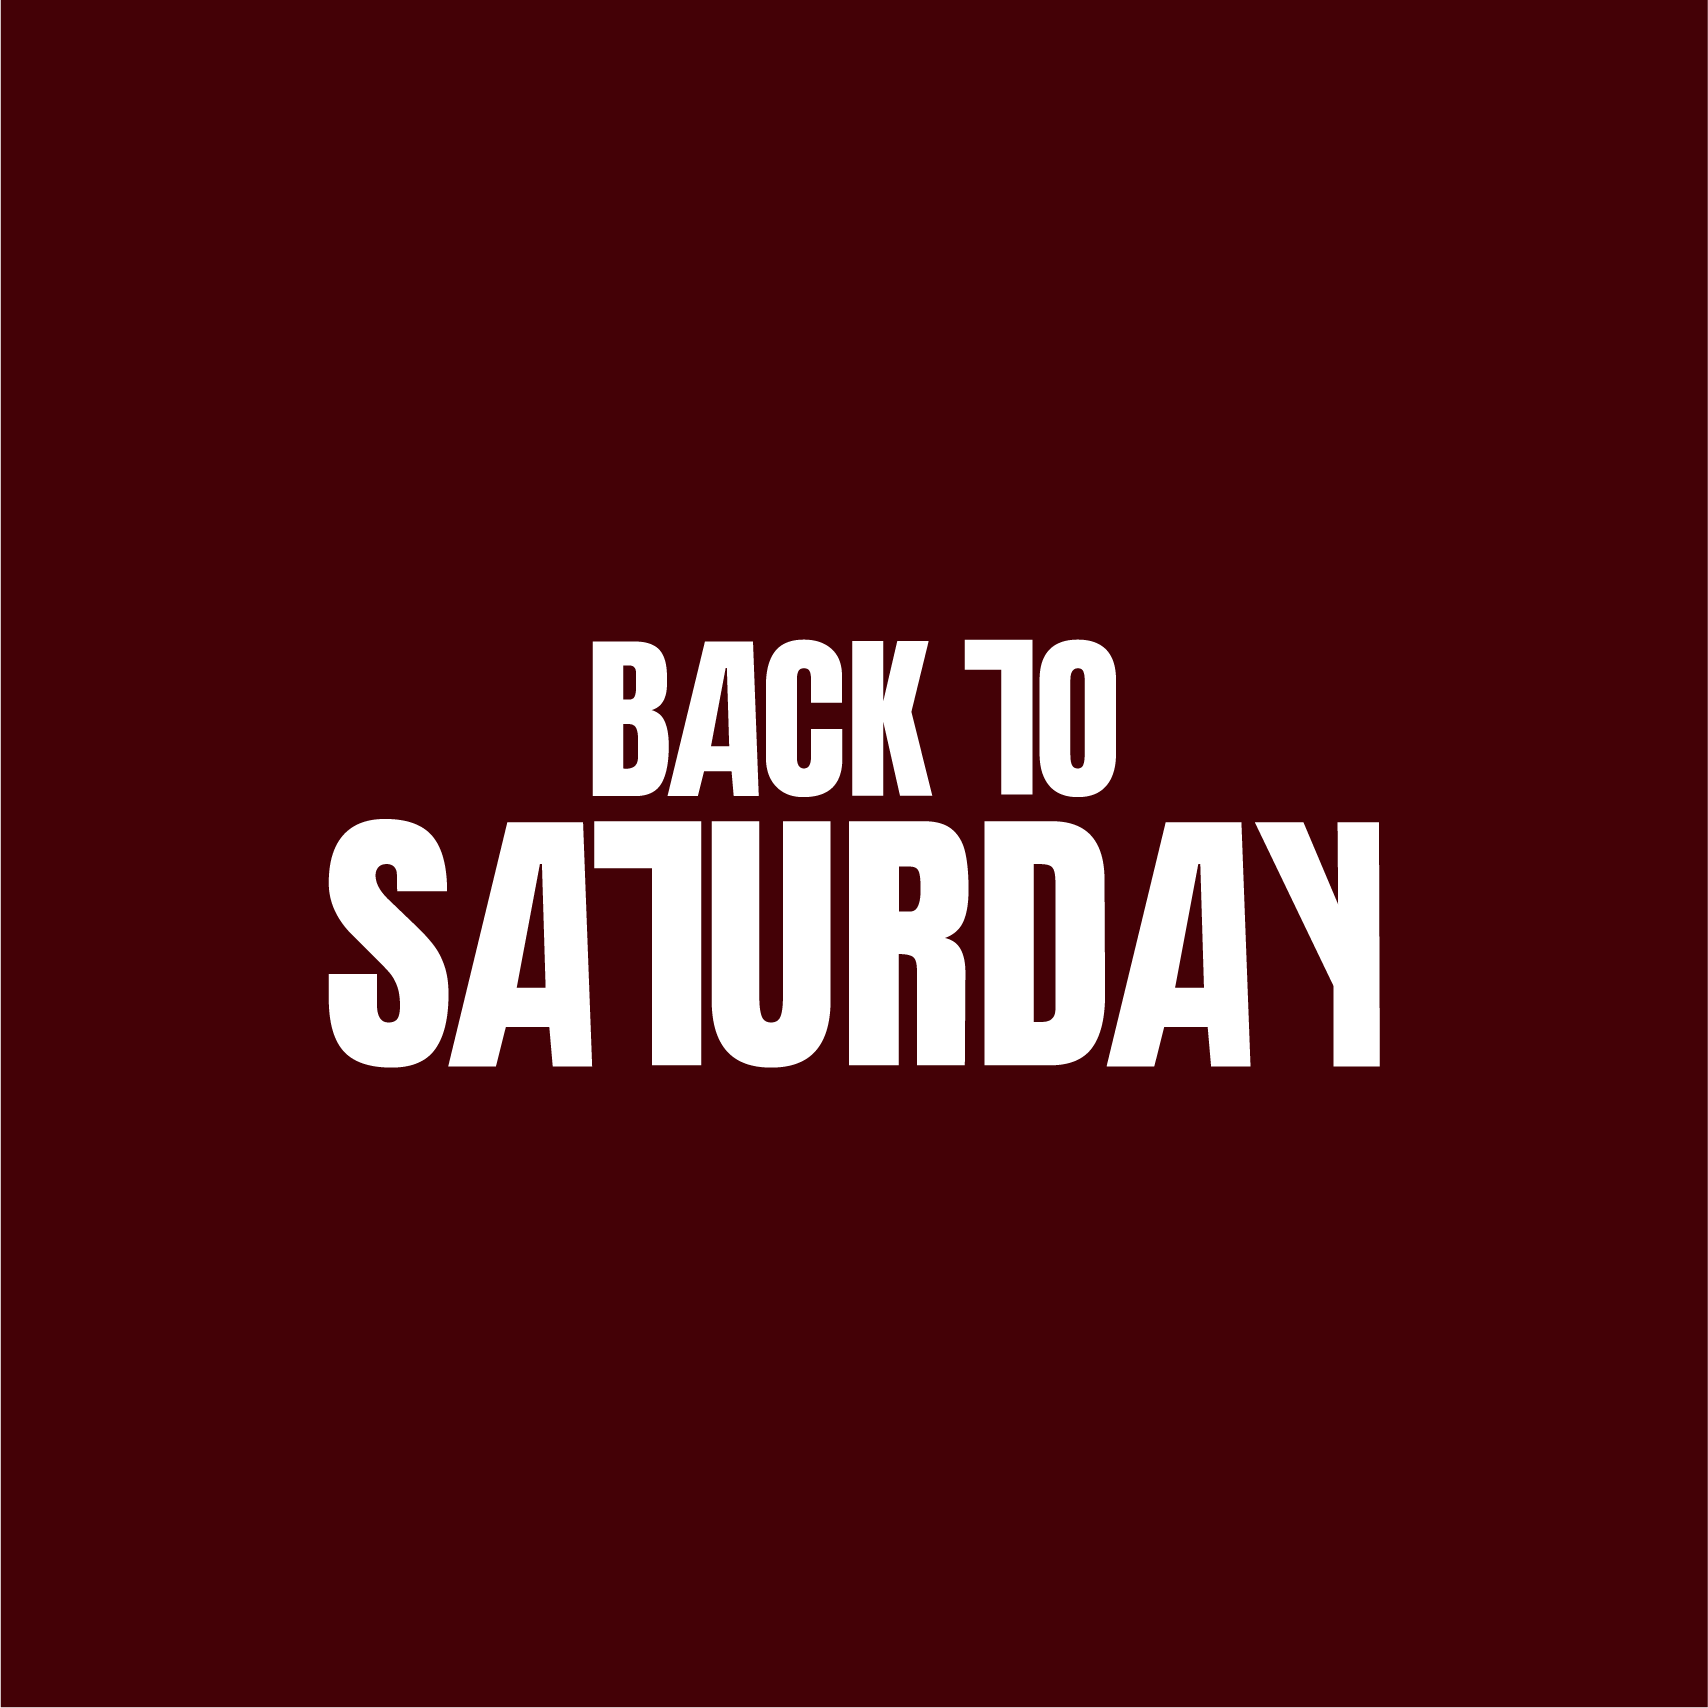 Back to Saturday